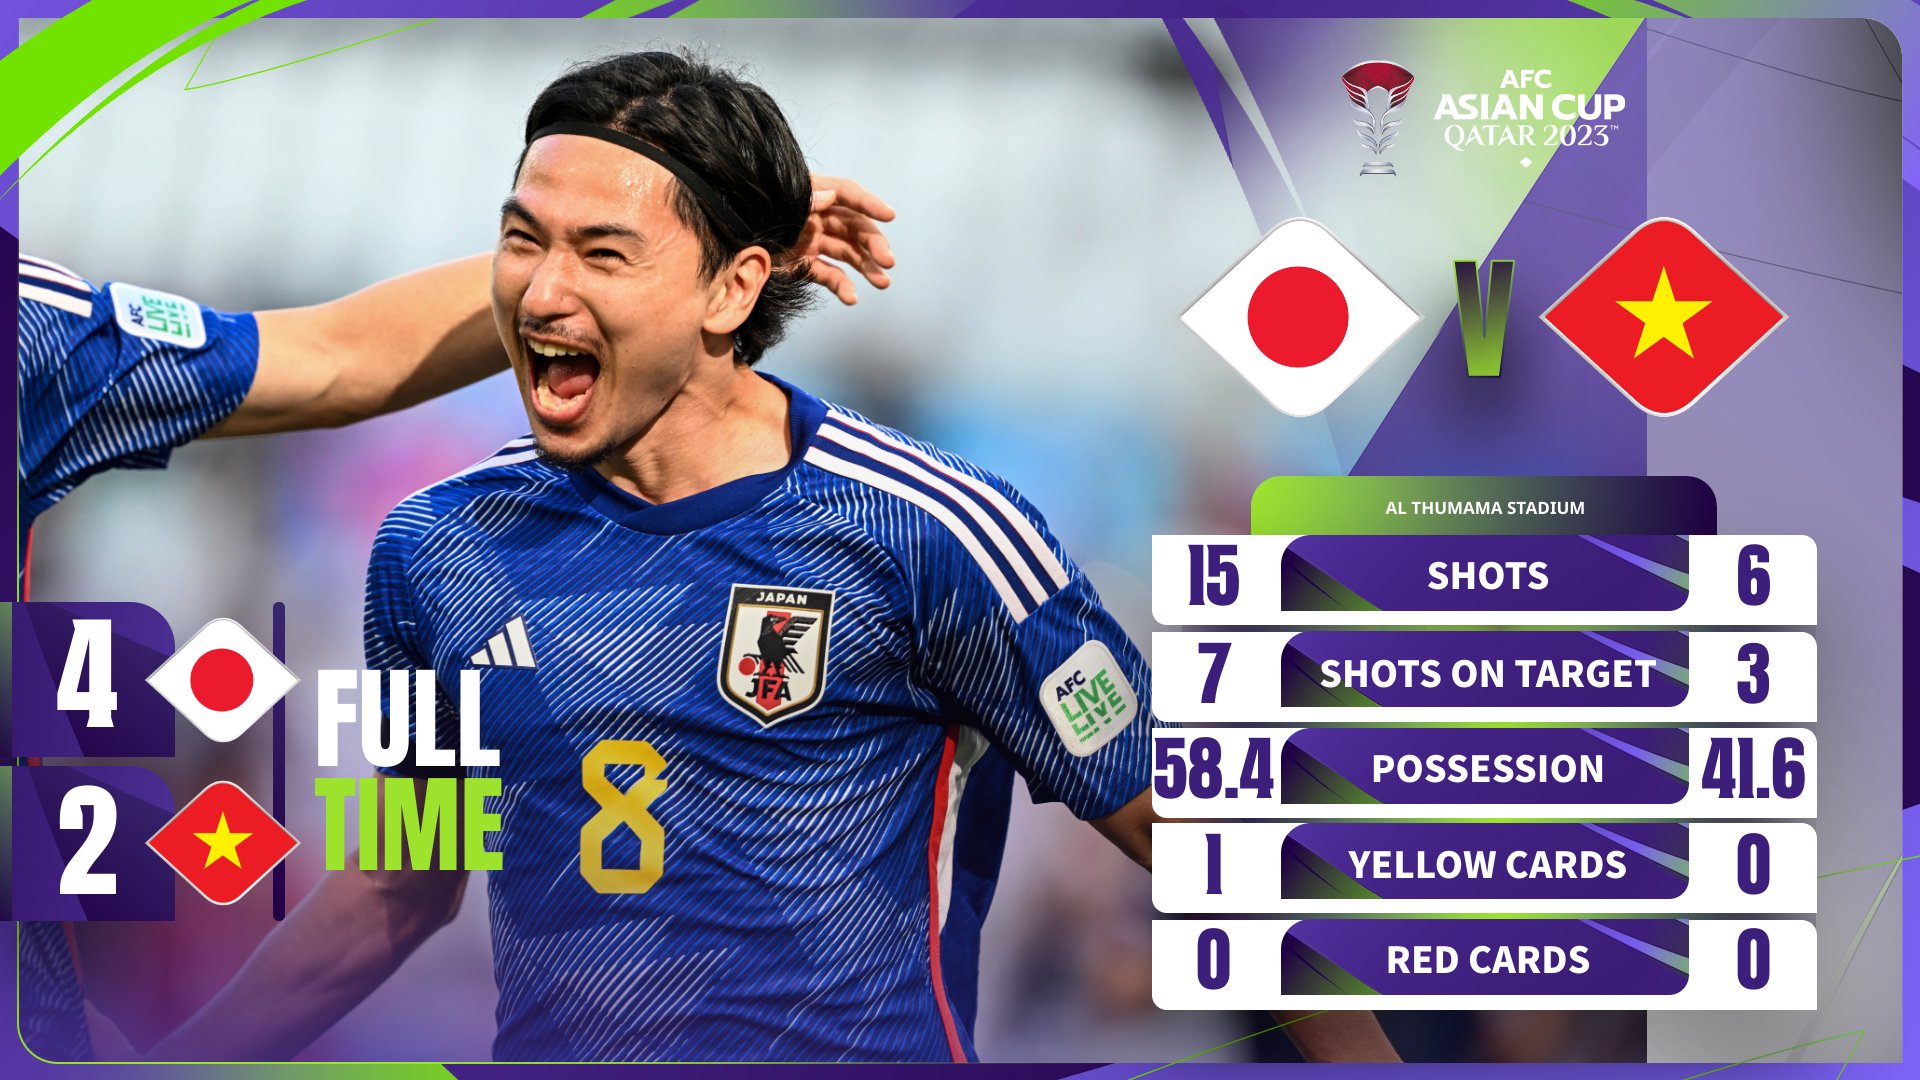 BabaGol on X: What a match! The first half was a real treat when Vietnam  took the lead, but in the end, it was Takumi Minamino's brace that gave  Japan their opener's